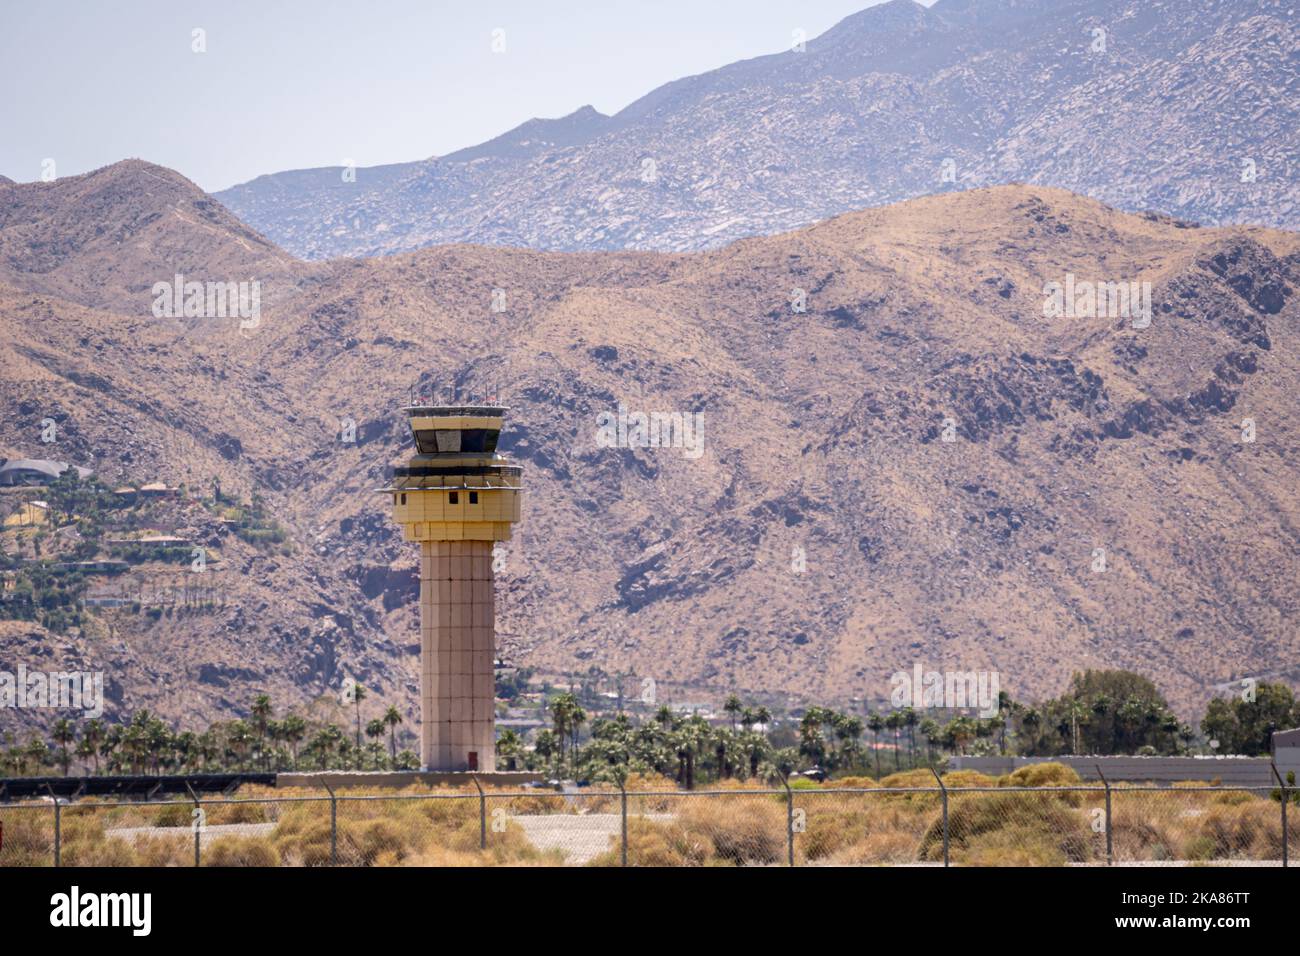 A scenic view of the airport control tower in Palm Strings, California surrounded by rocky hills on a hot day Stock Photo